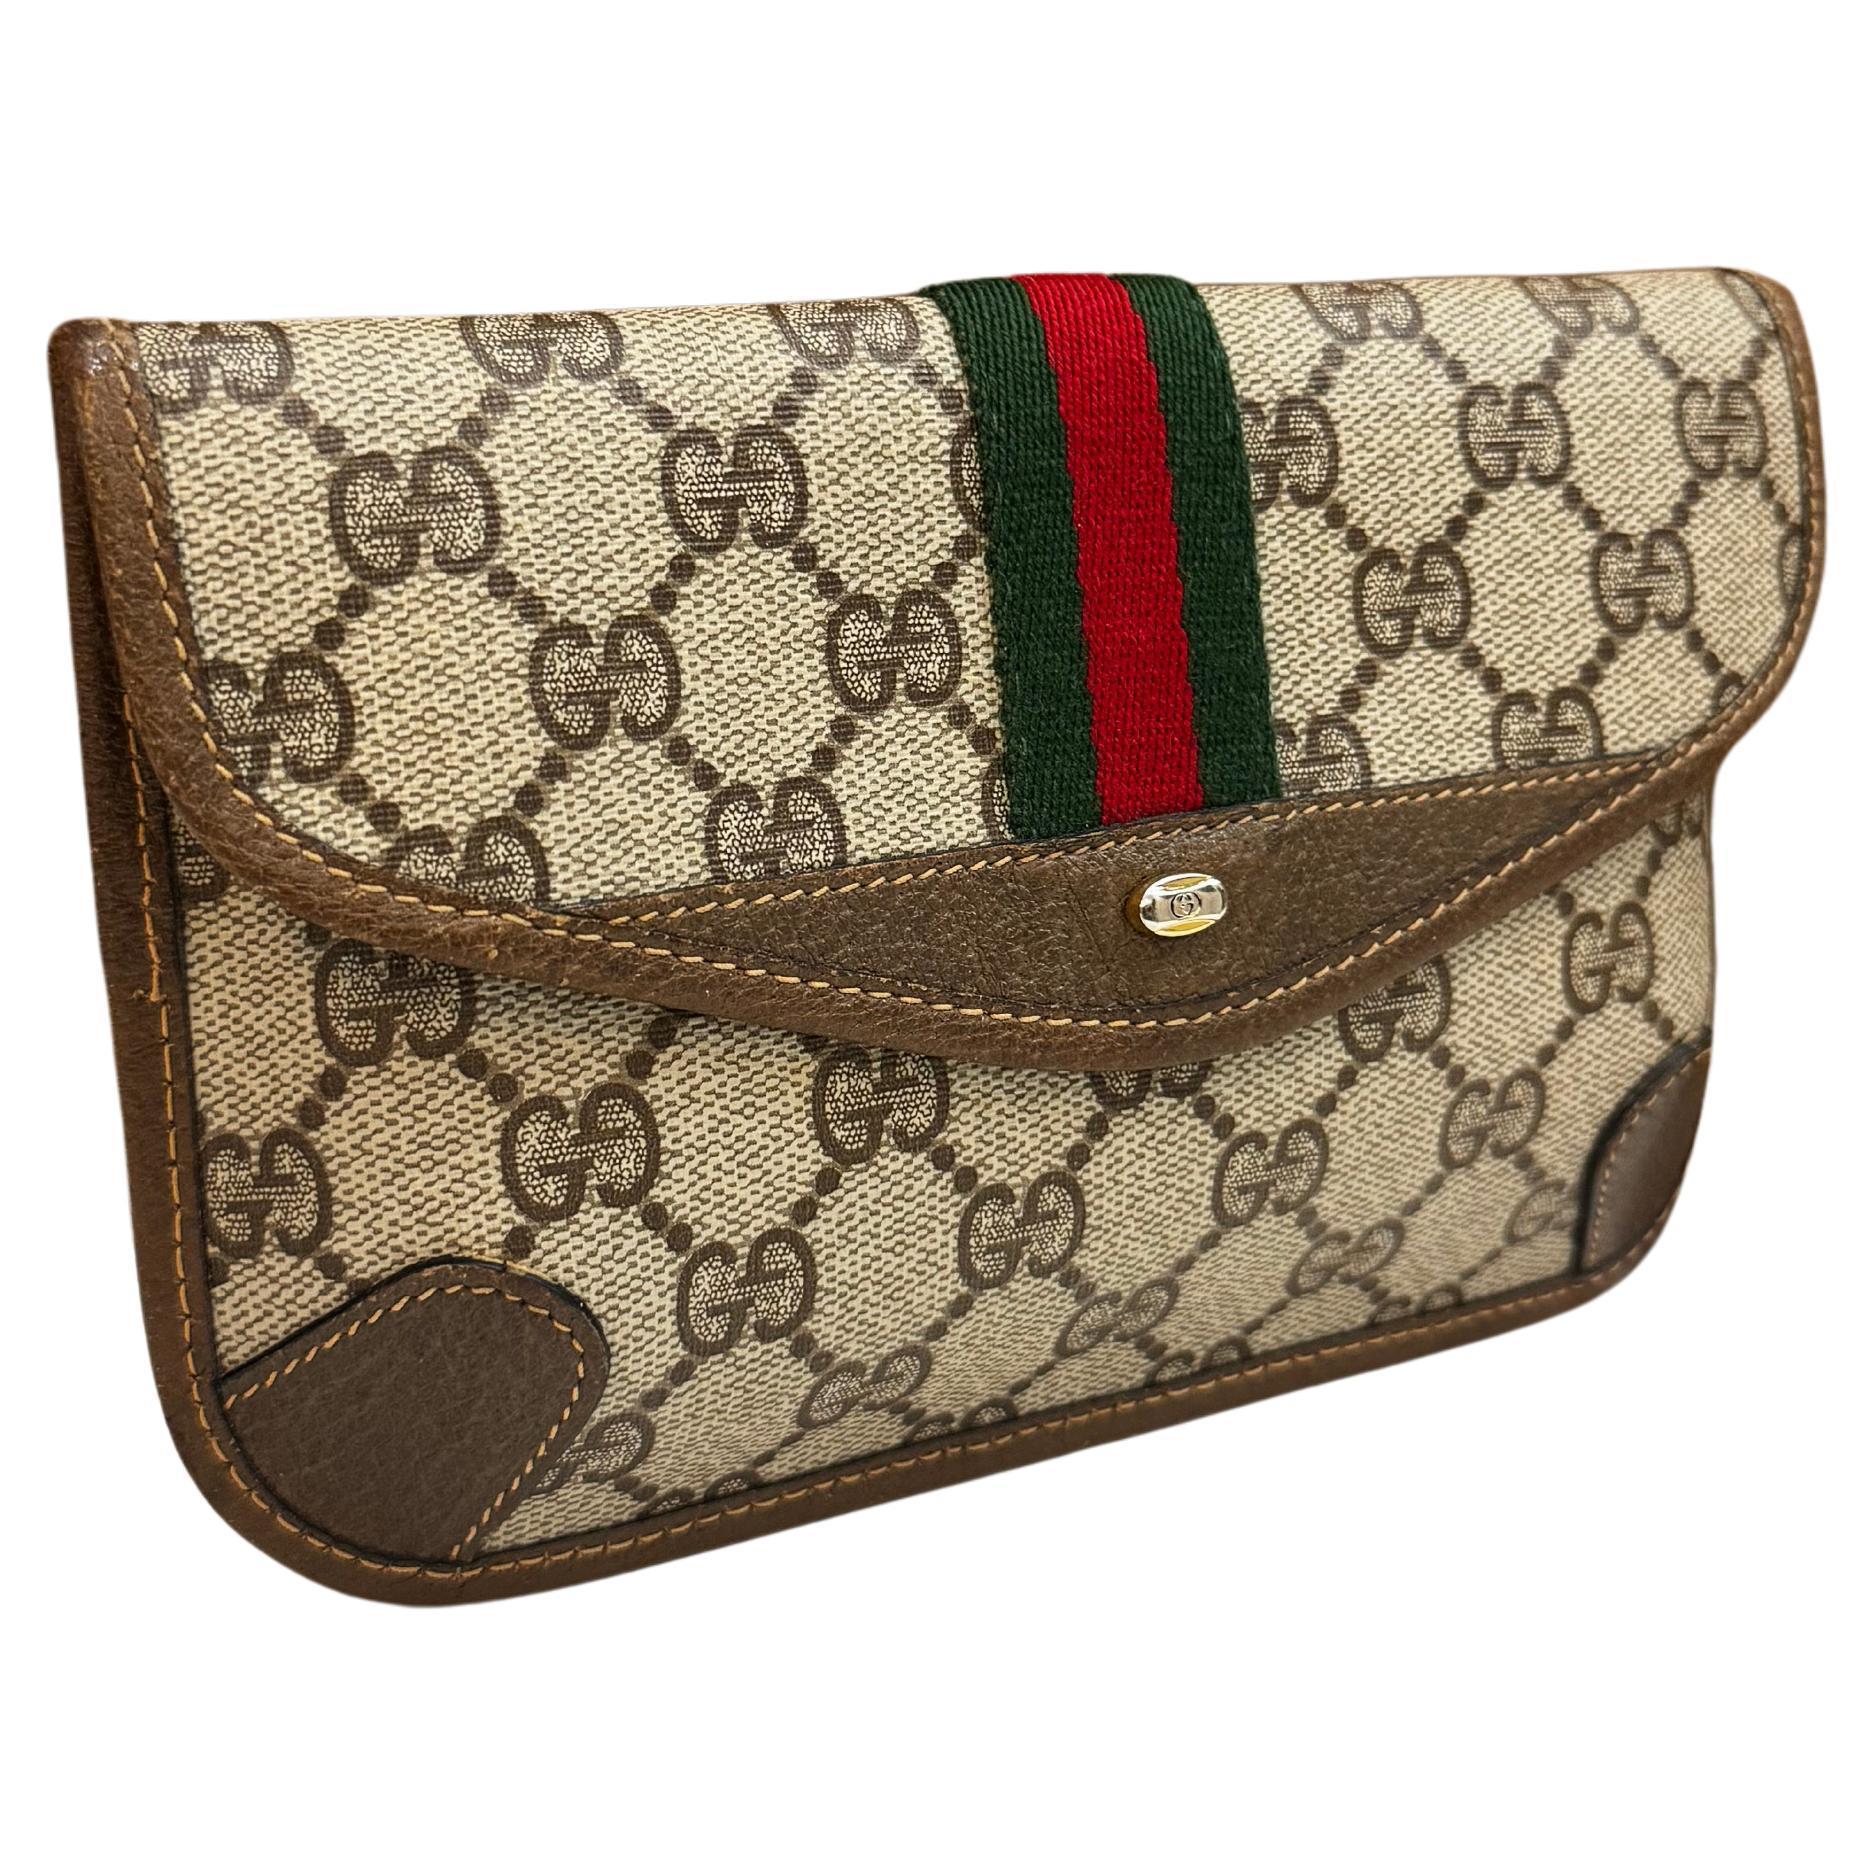 This vintage GUCCI pouch bag is crafted of GG monogram canvas in brown trimmed with brown pigskin’s leather. Front snap closure opens to an un-lined interior. Made in Italy. Measures approximately 7.5 x 5 x 0.5 inches.

Condition - Excellent vintage